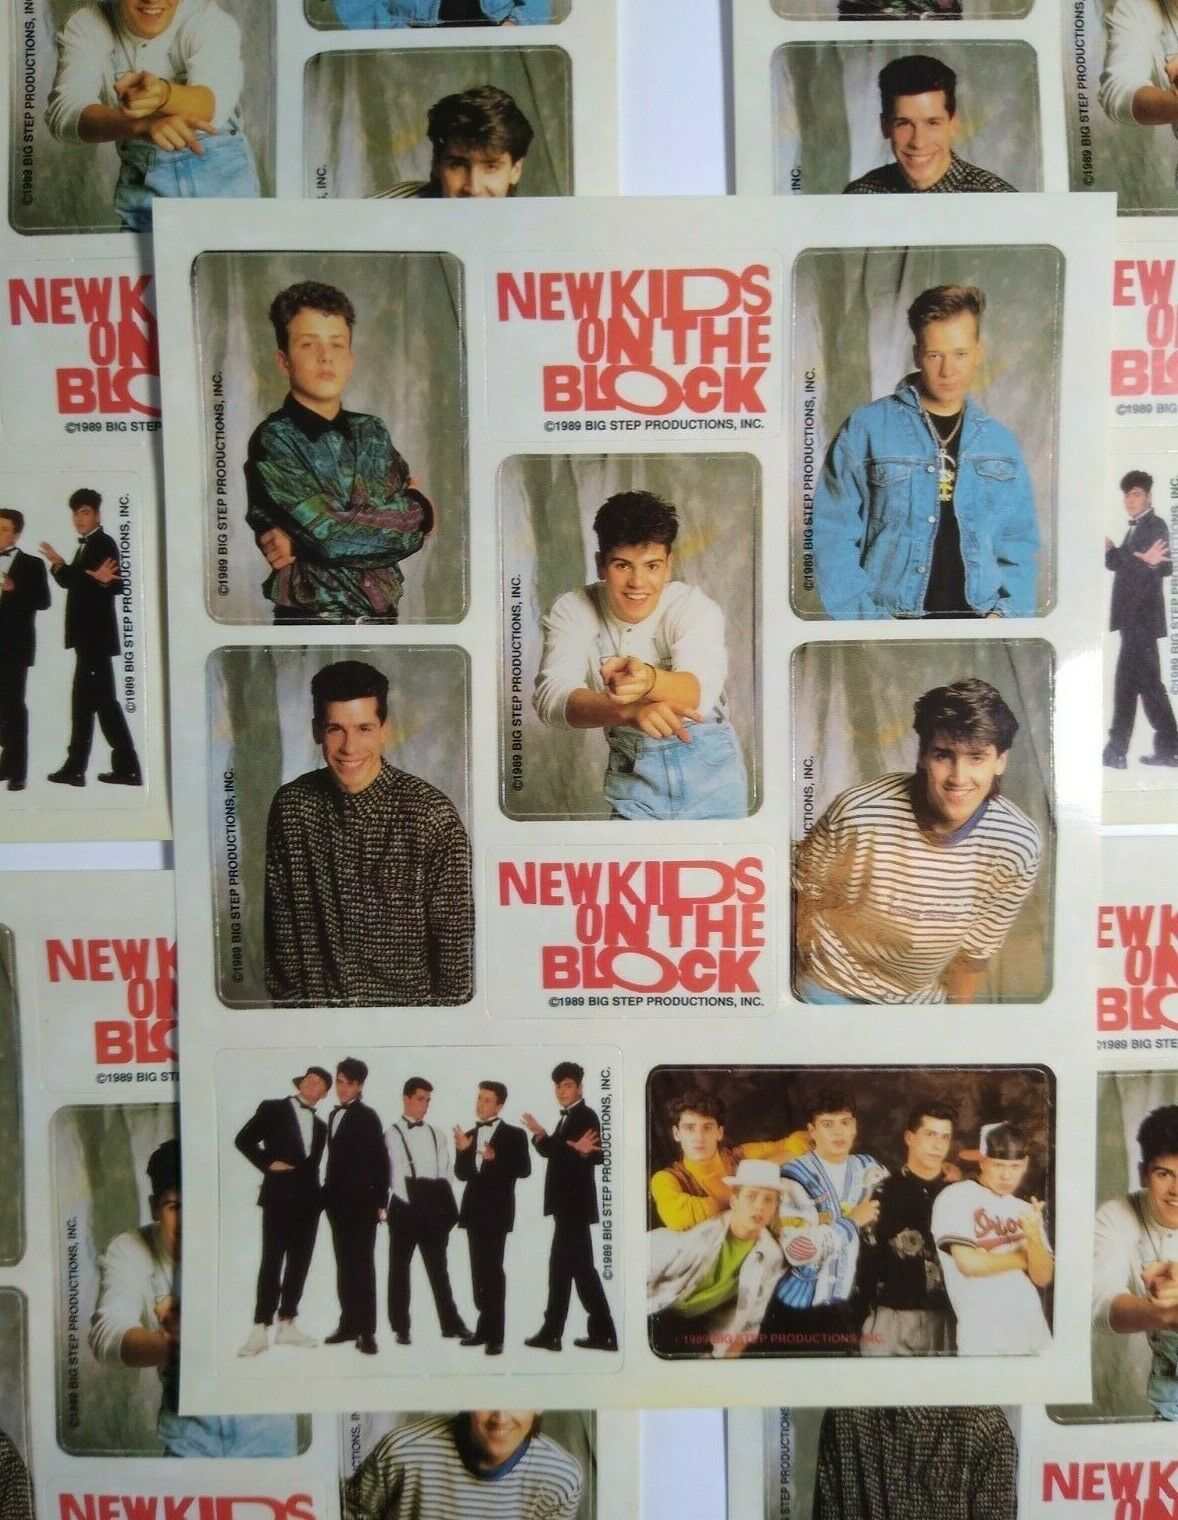 New Kids On The Block Band Photo Stickers 1989 Original Lot of 5 Sets Pop Music